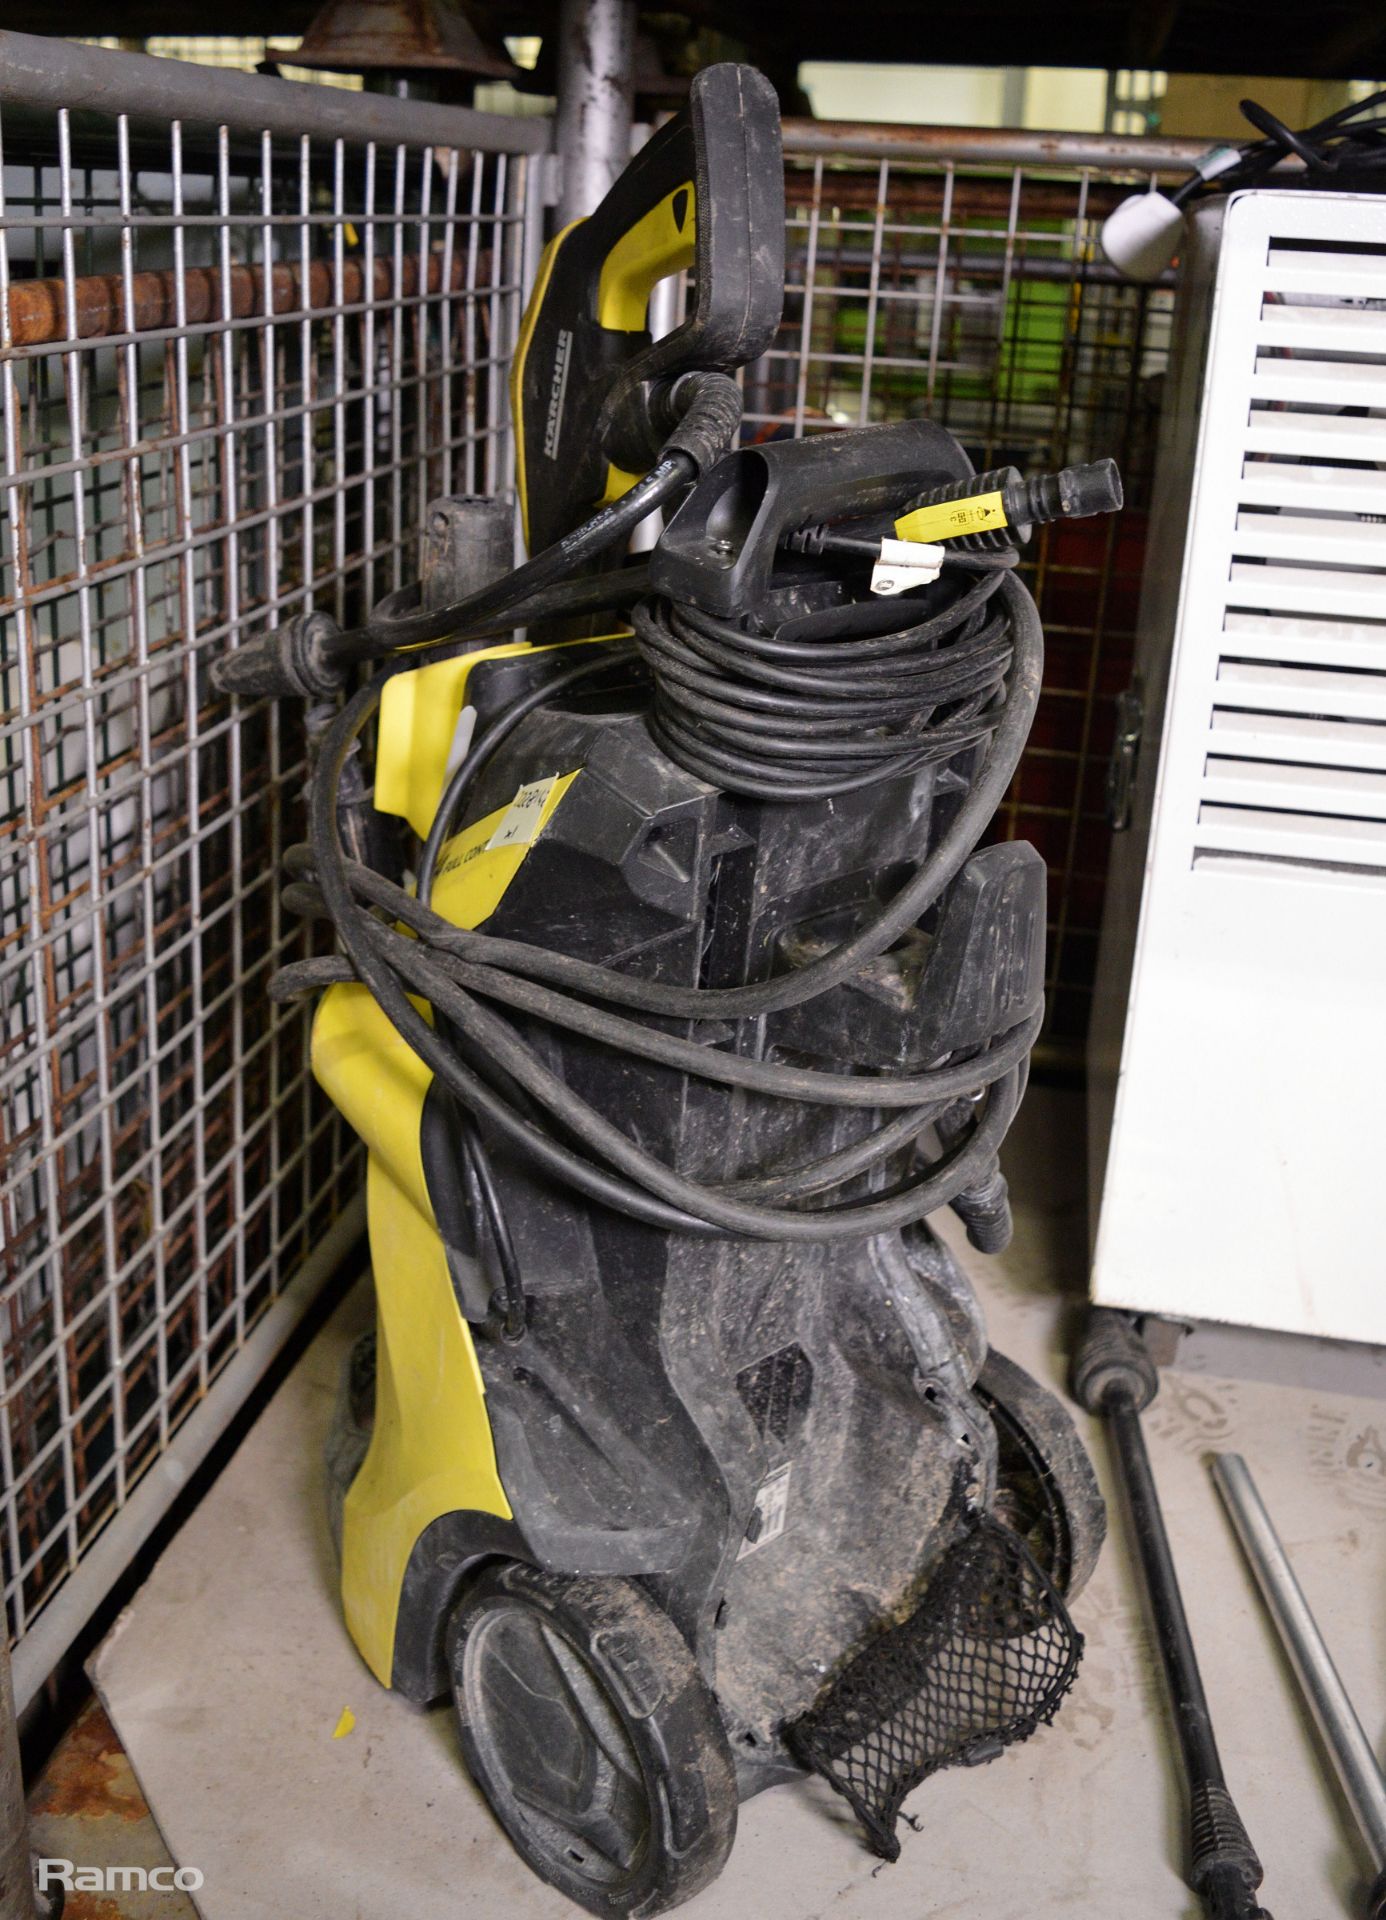 Karcher Patio Cleaning Head Attachment, 2x Karcher K4 Full Control Pressure Washers - Image 4 of 12